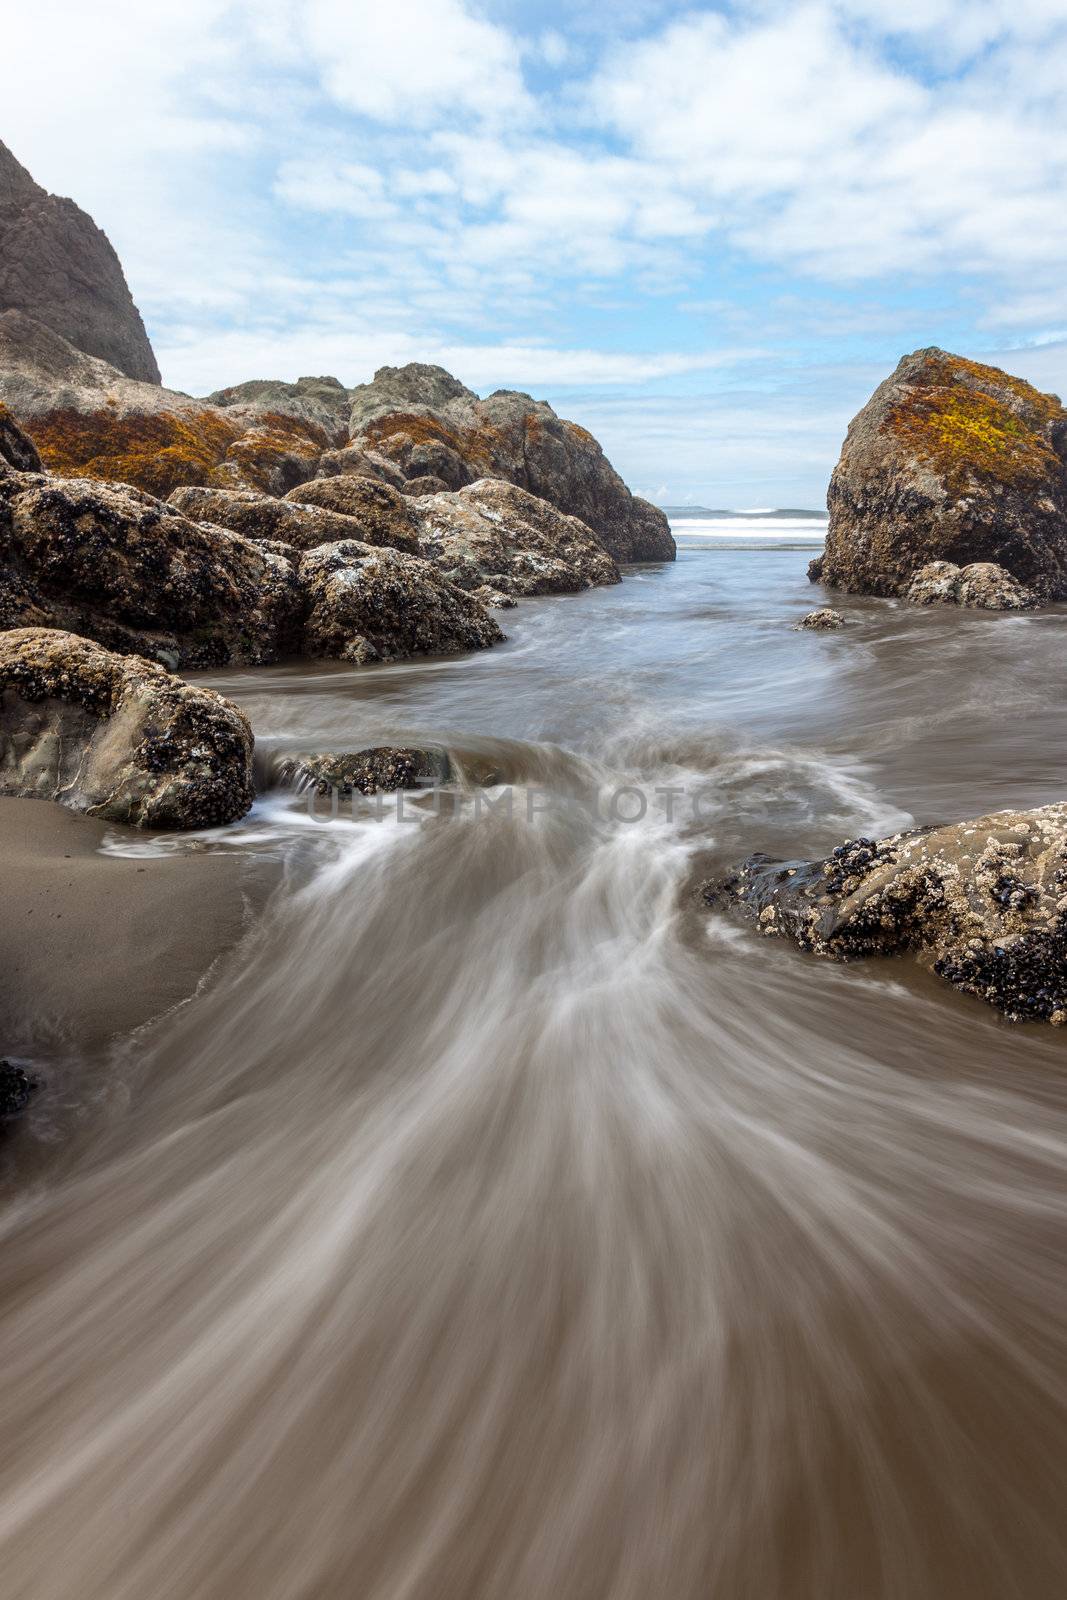 Incoming waterflow at Ruby Beach by gnives50